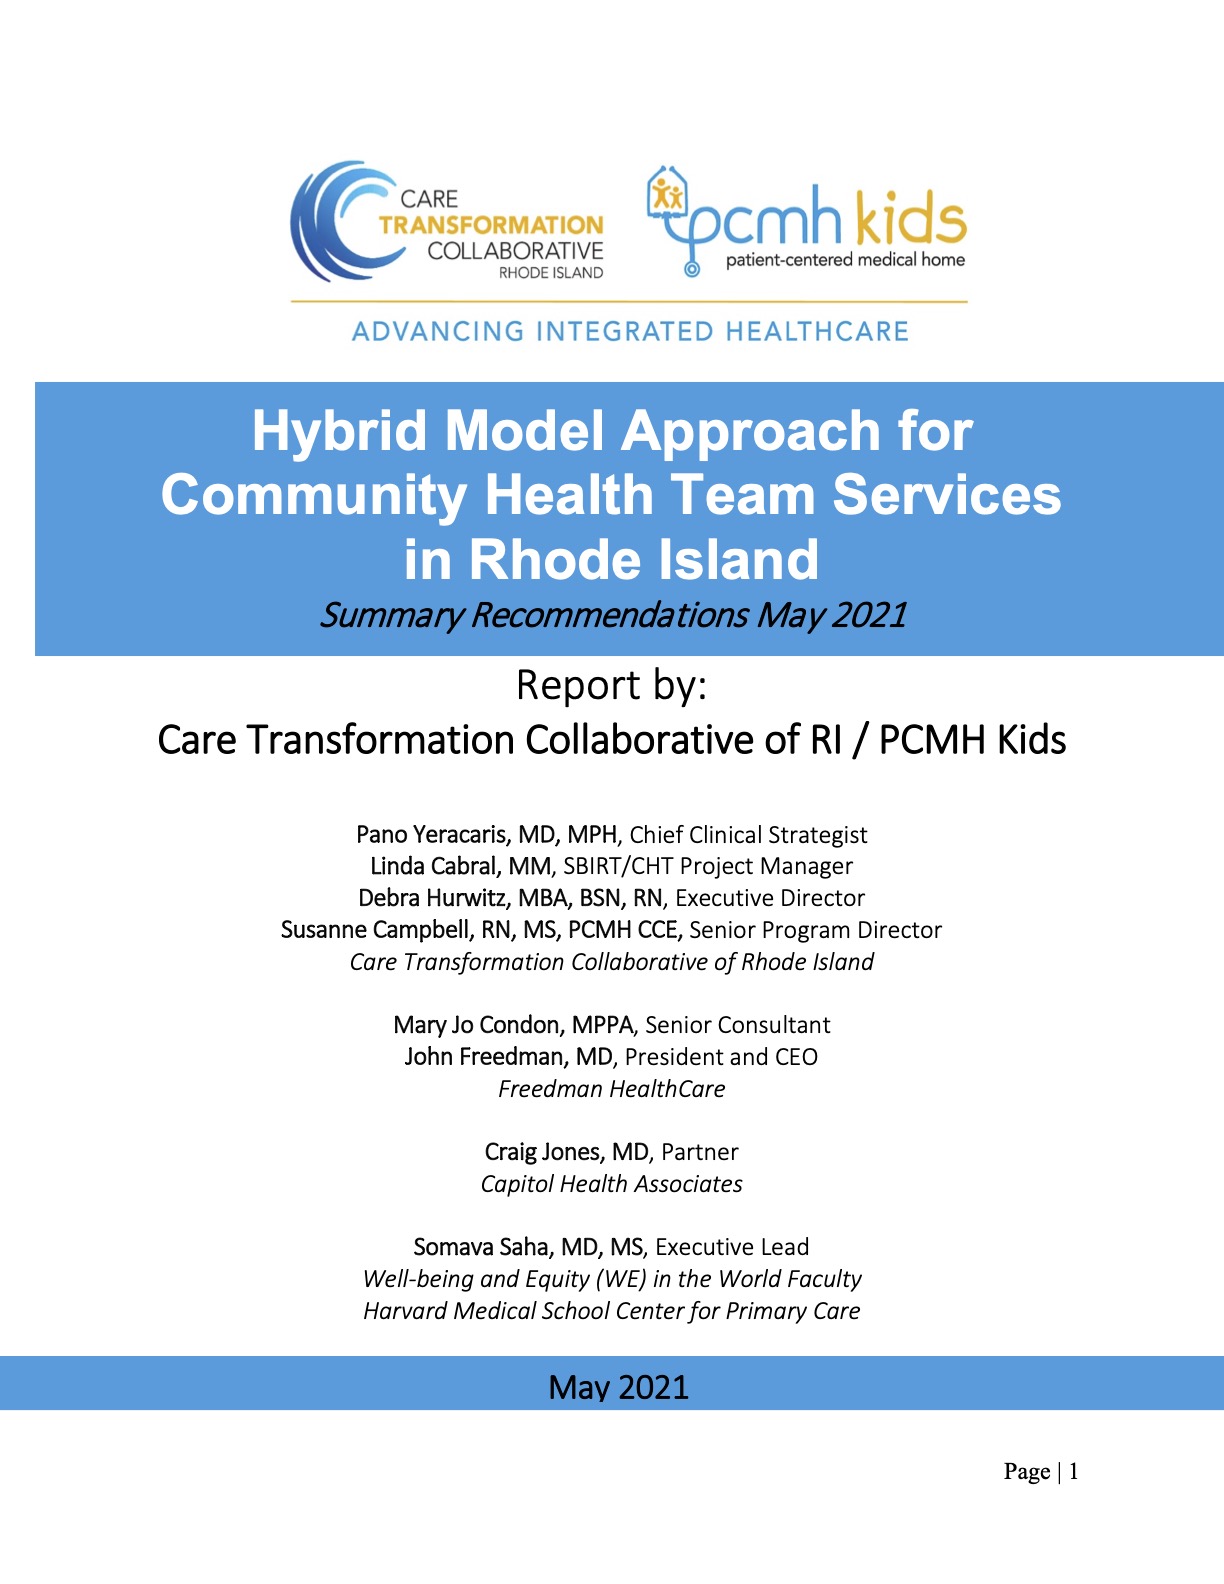 Hybrid Model Approach for Community Health Team Services in Rhode Island